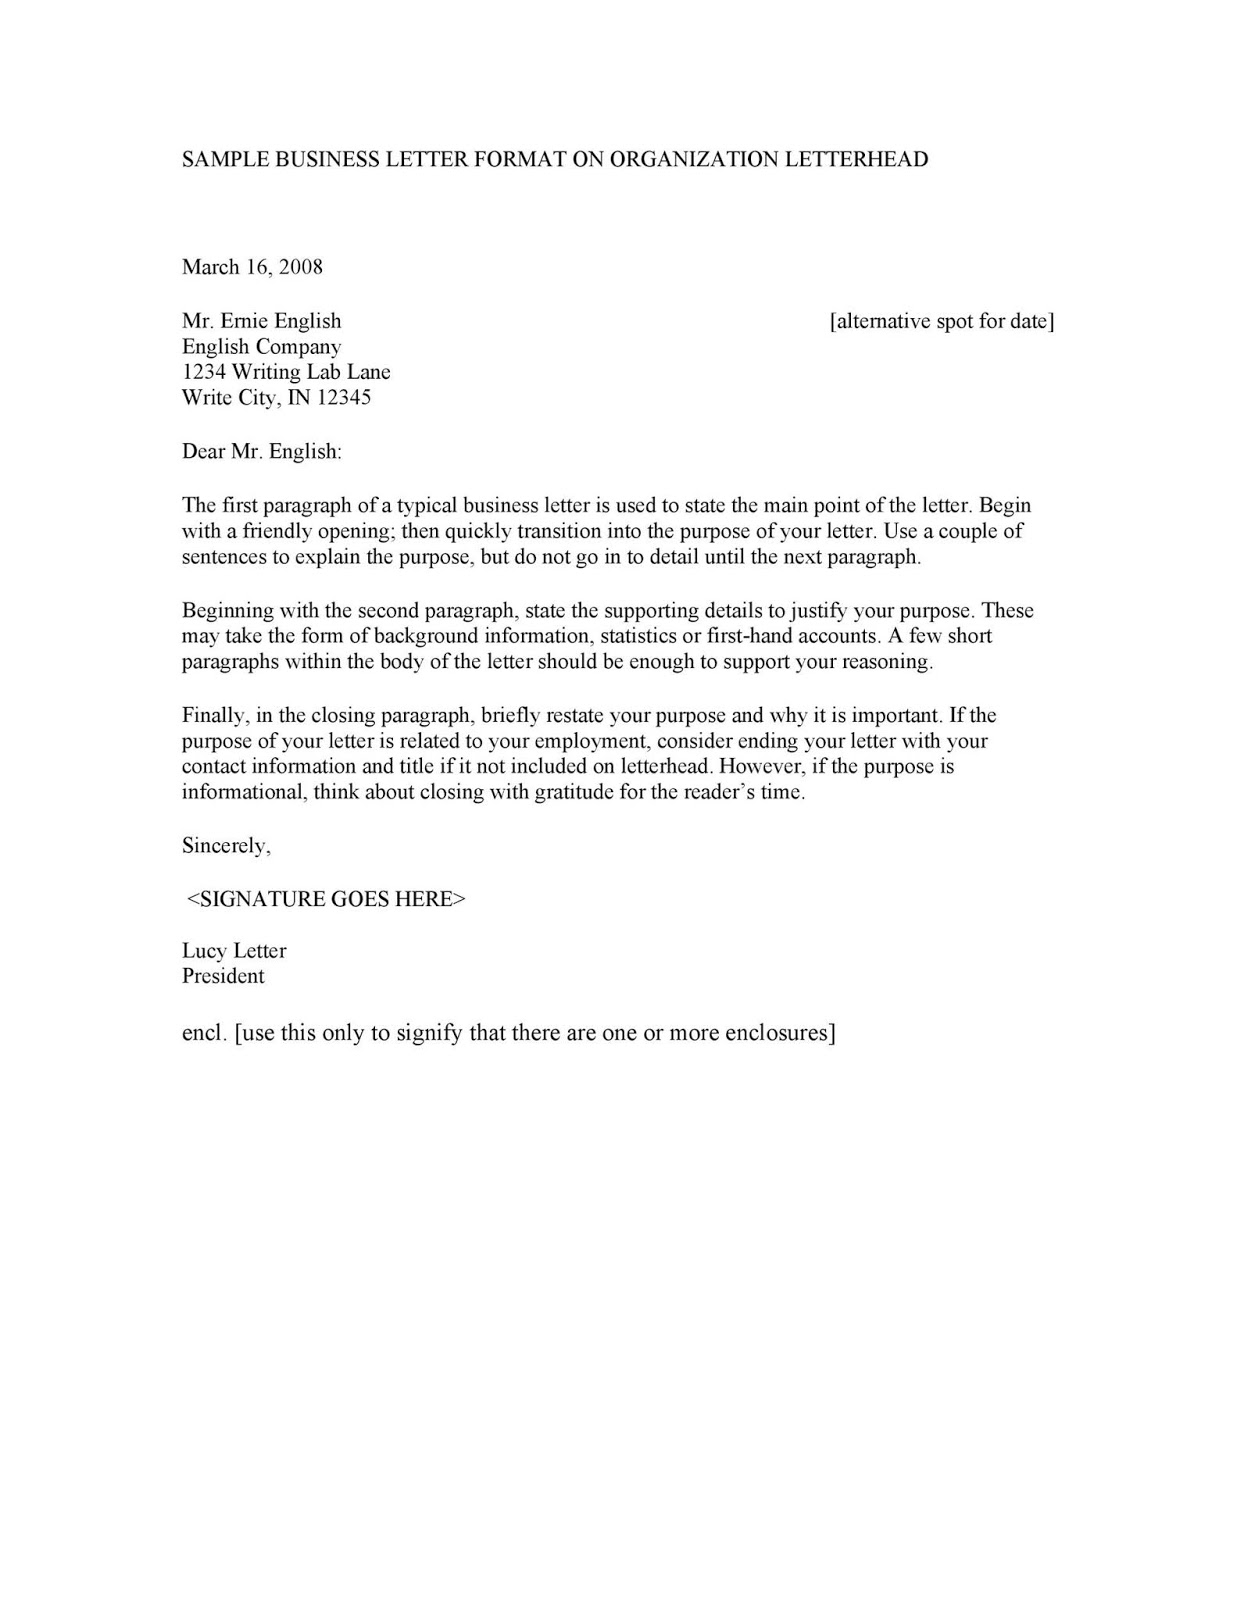 Business Letter Example For A Company  Writing Letter